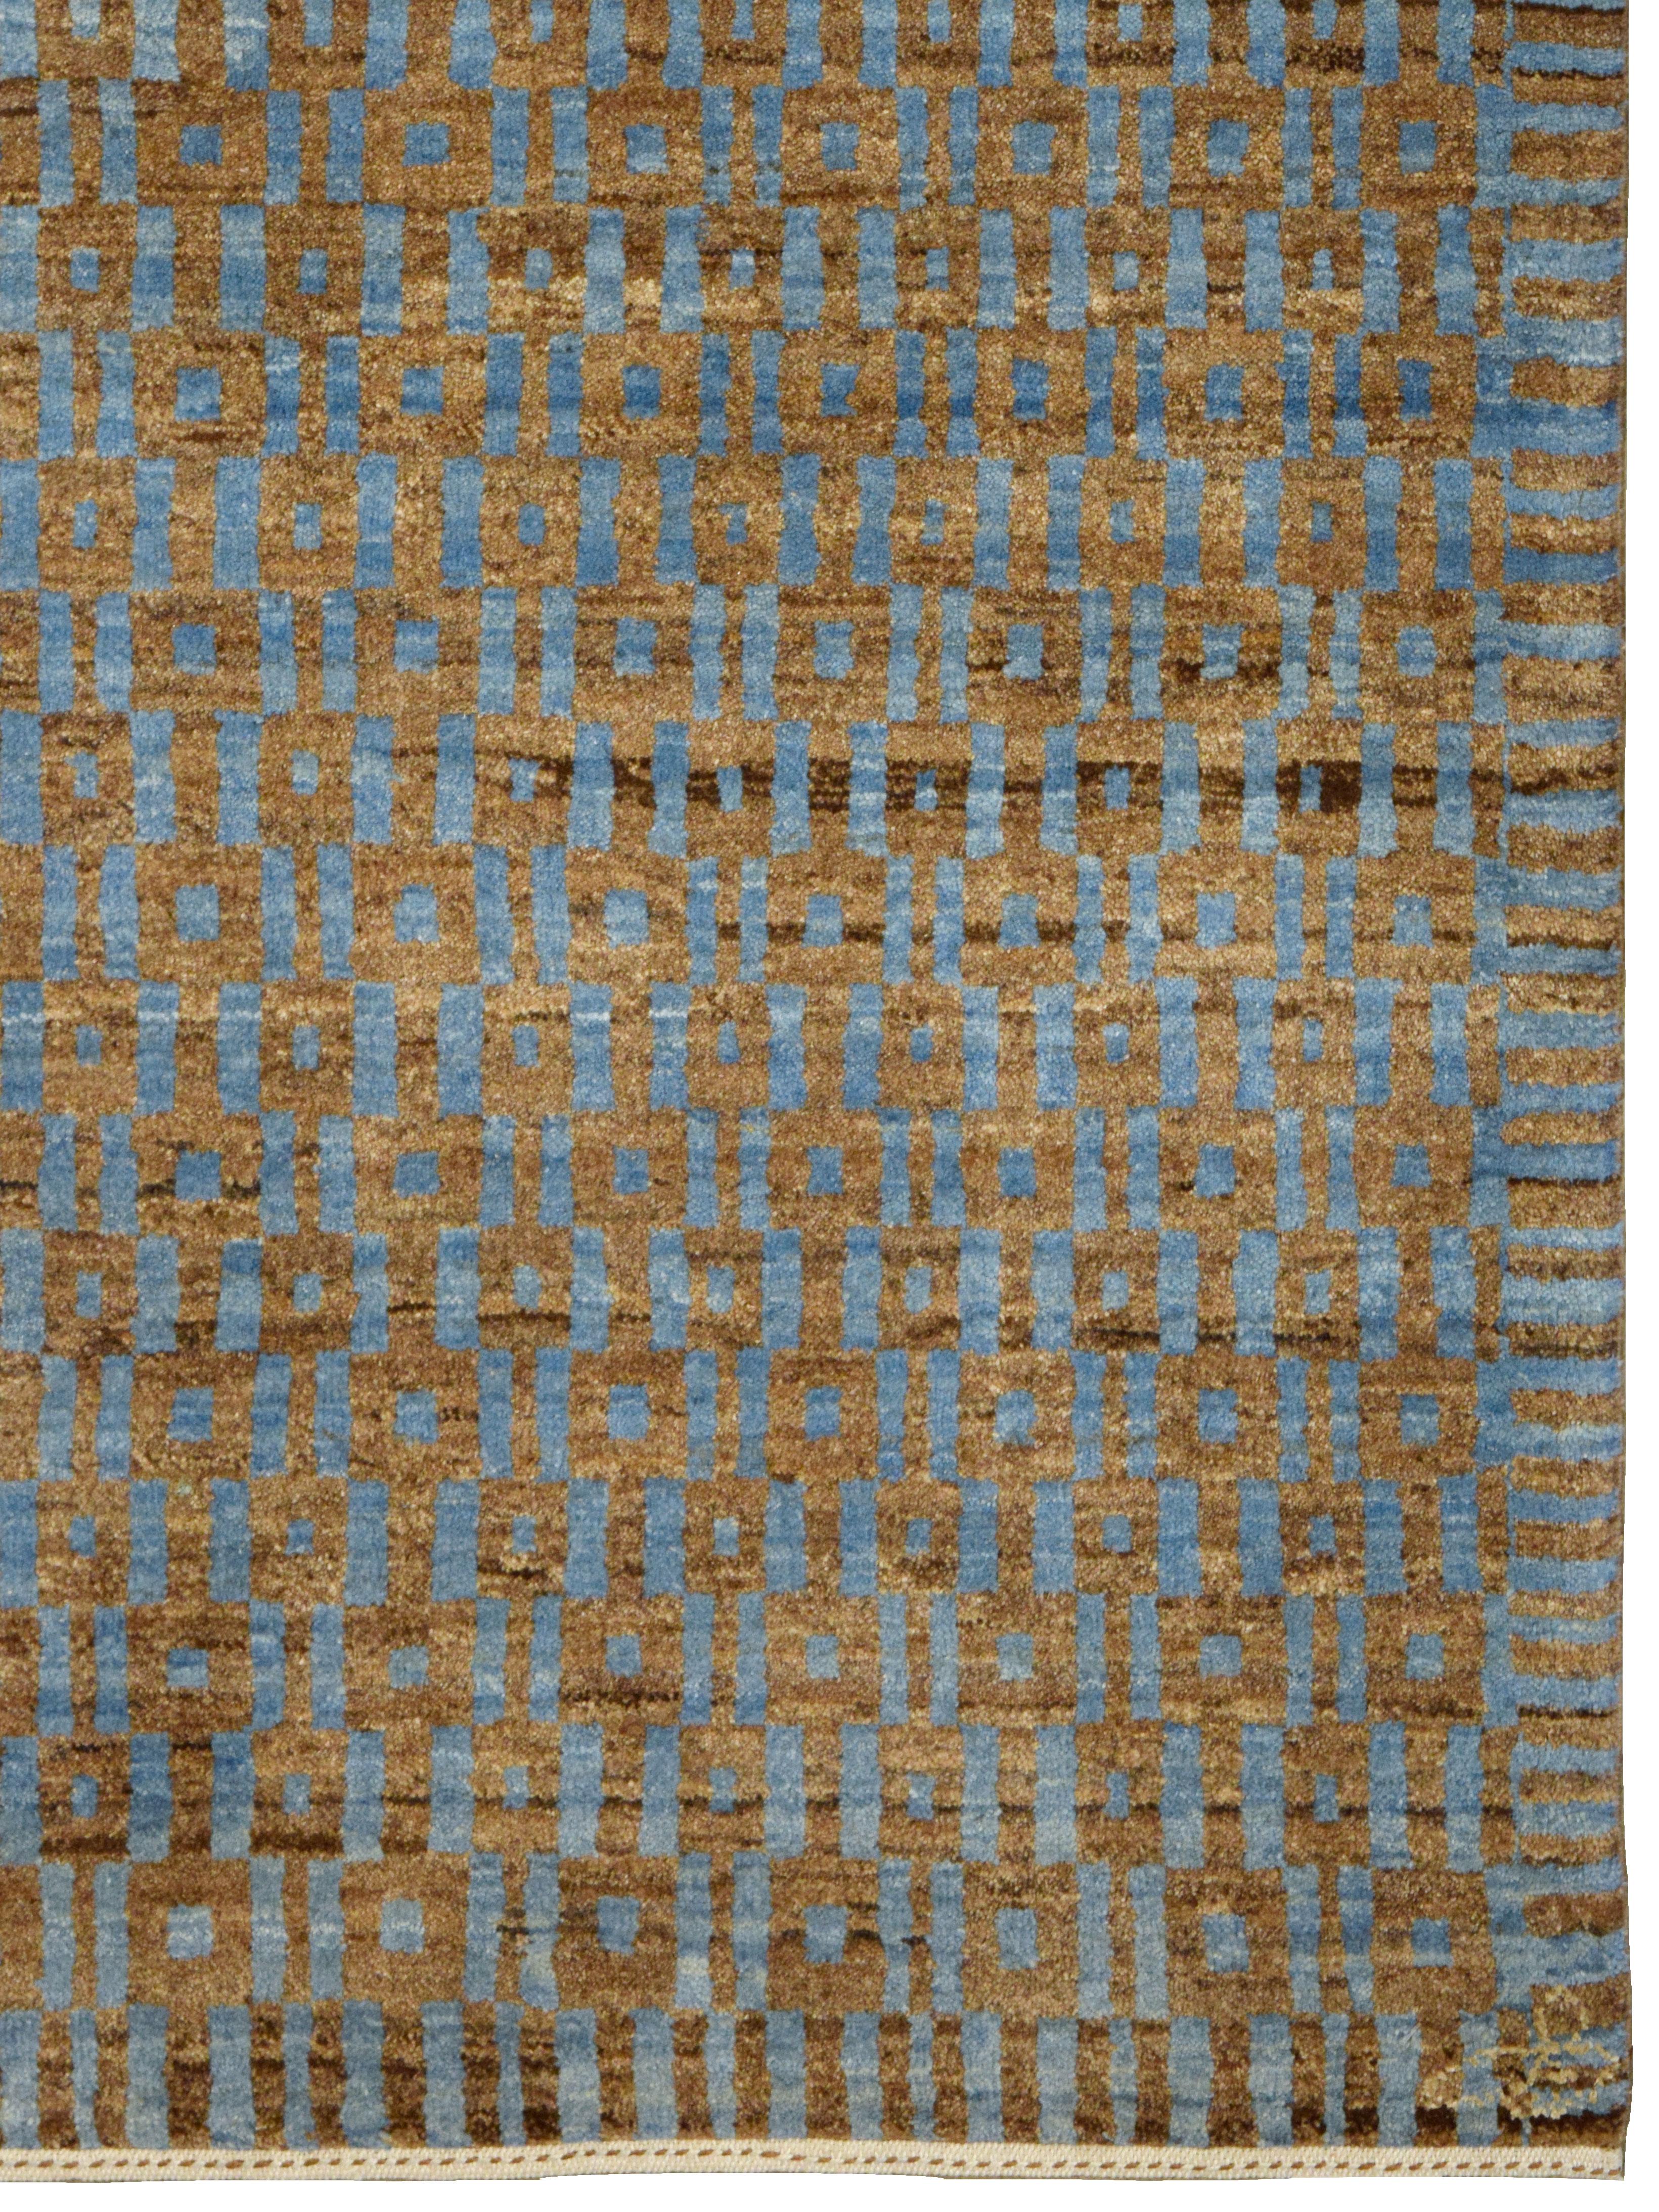 Orley Shabahng, Hand-Knotted, Art Deco Wool Persian Carpet, Blue, Brown, 5'x 12' For Sale 2